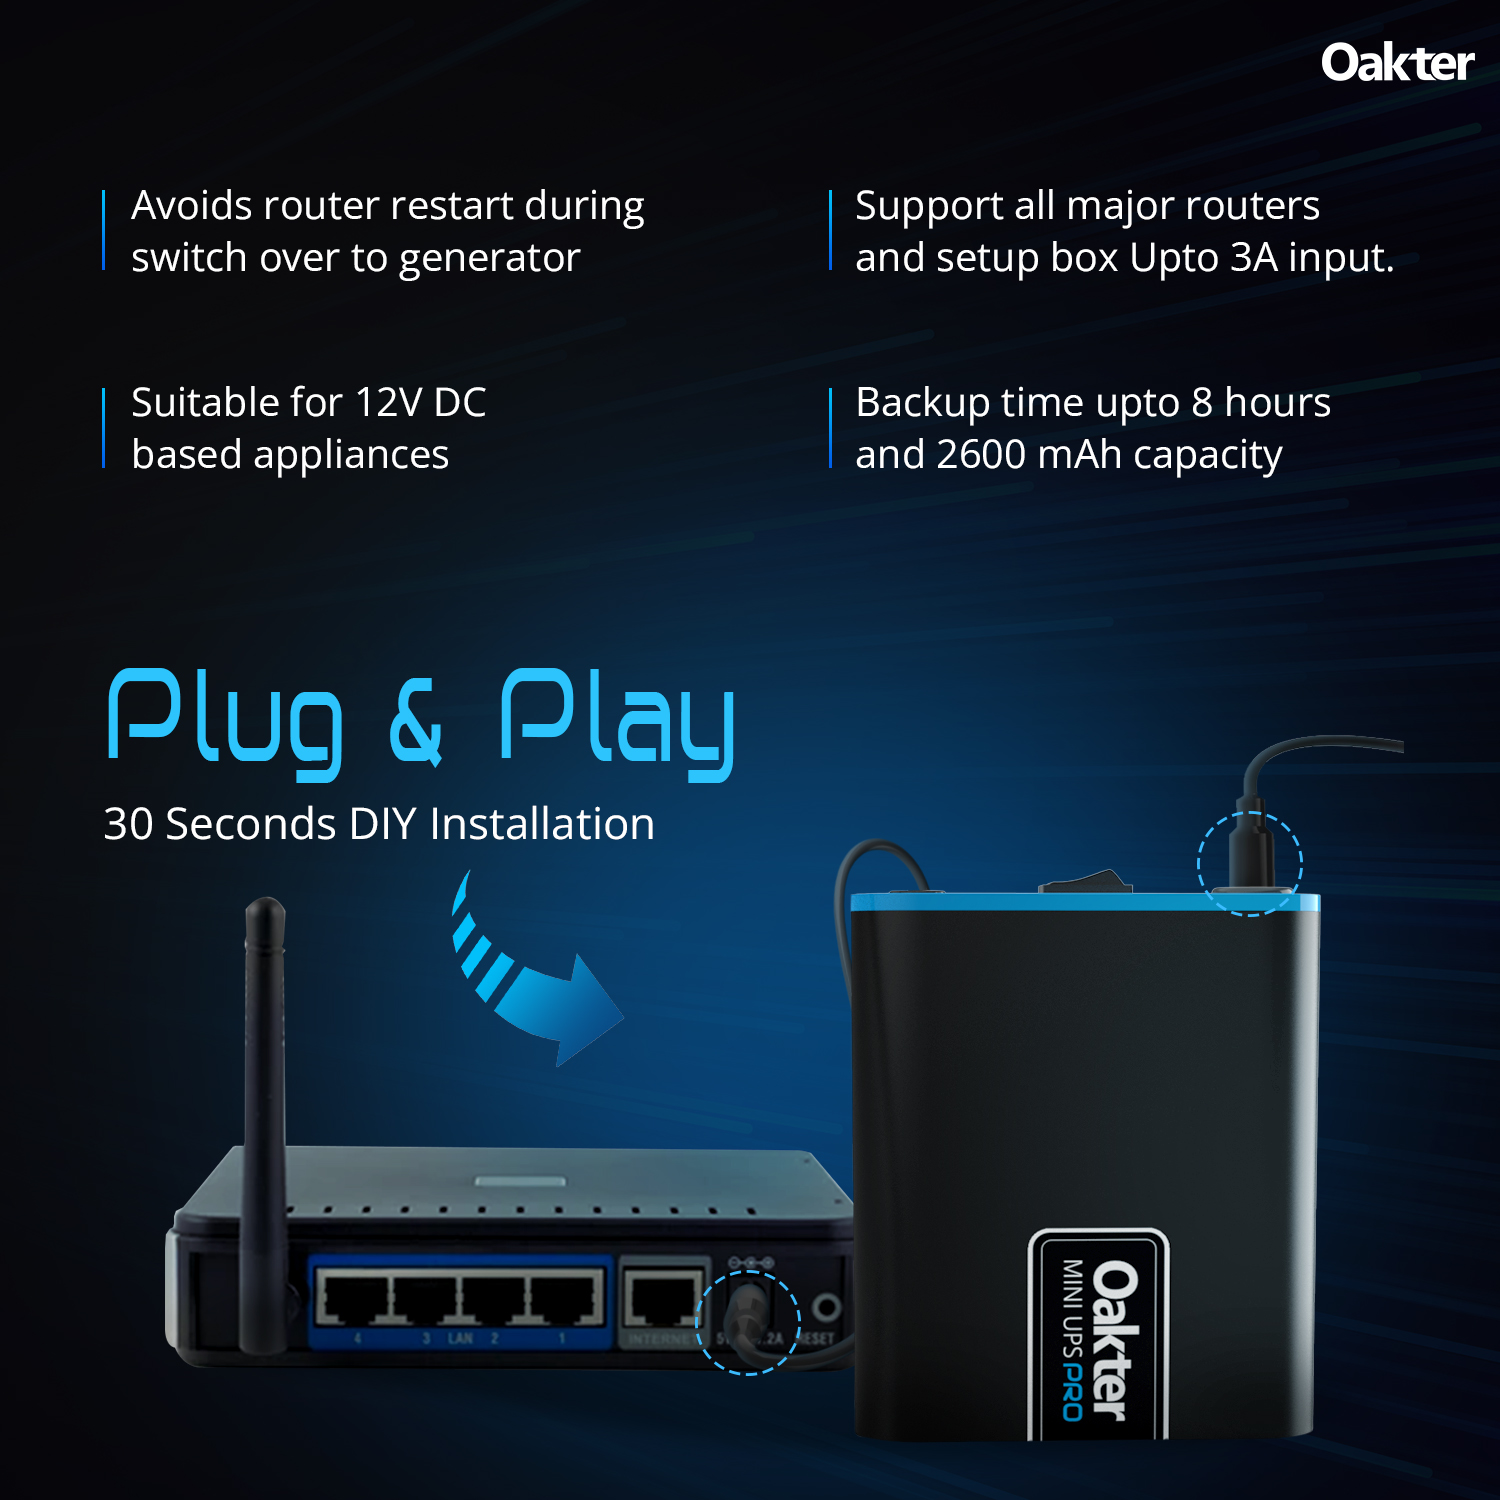  Oakter Raises the Bar with the launch of Mini UPS Pro